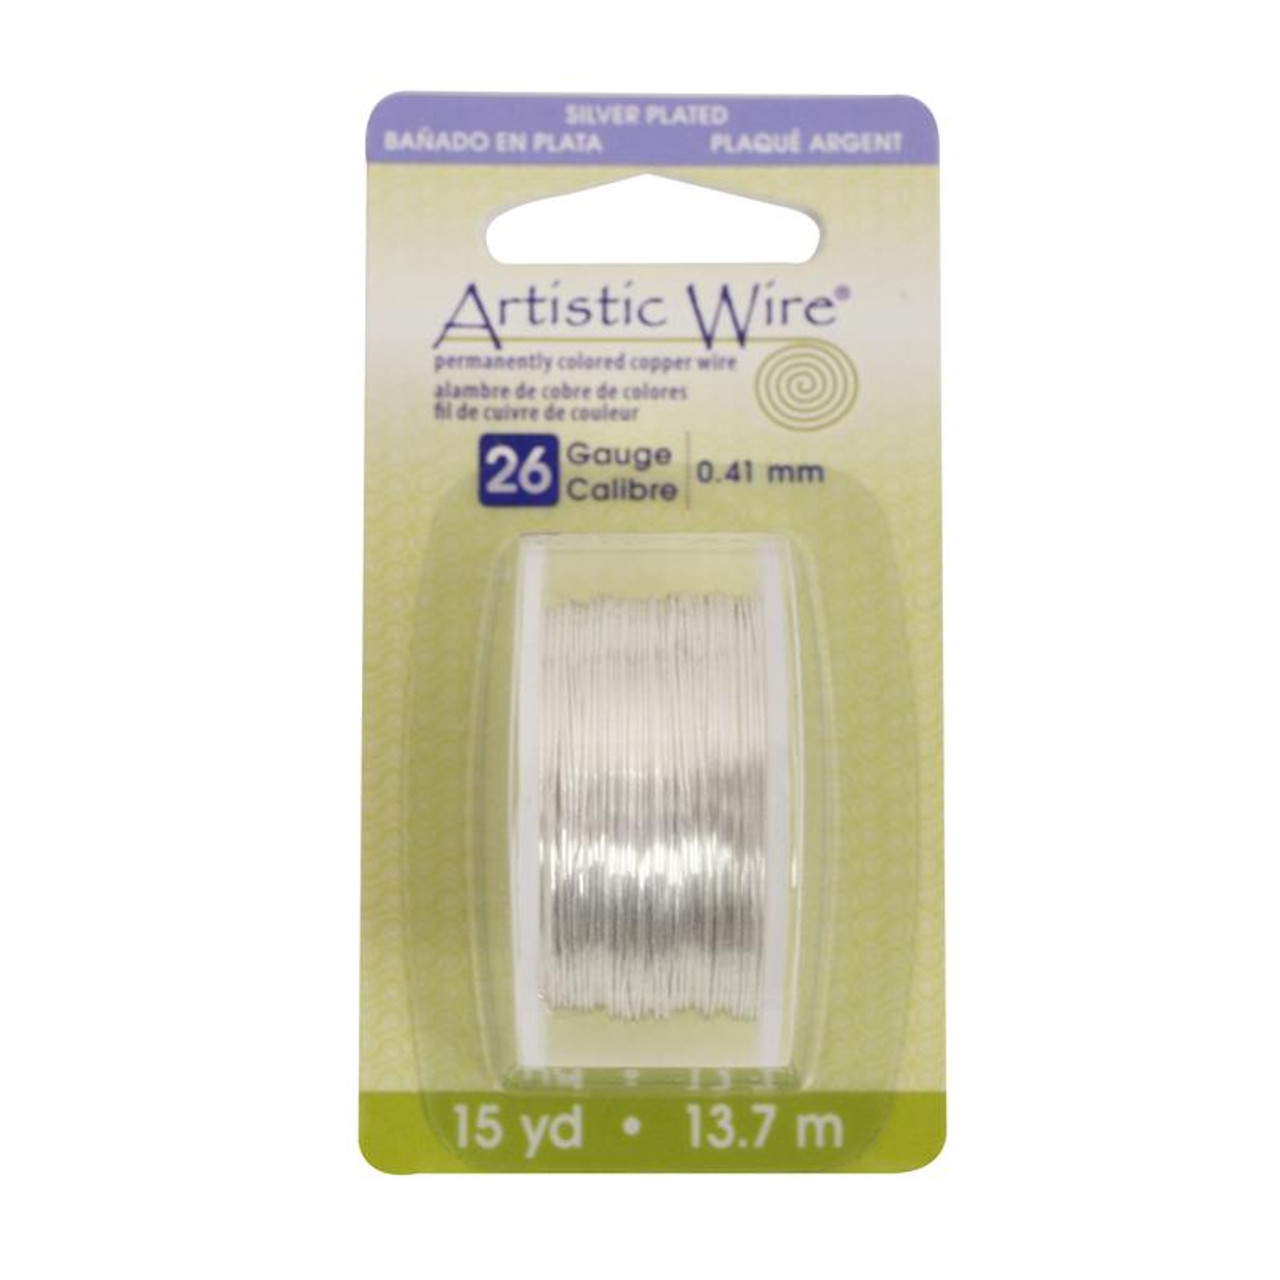 Artistic Wire 26 Gauge Silver Color Craft Wire Silver Plated Copper